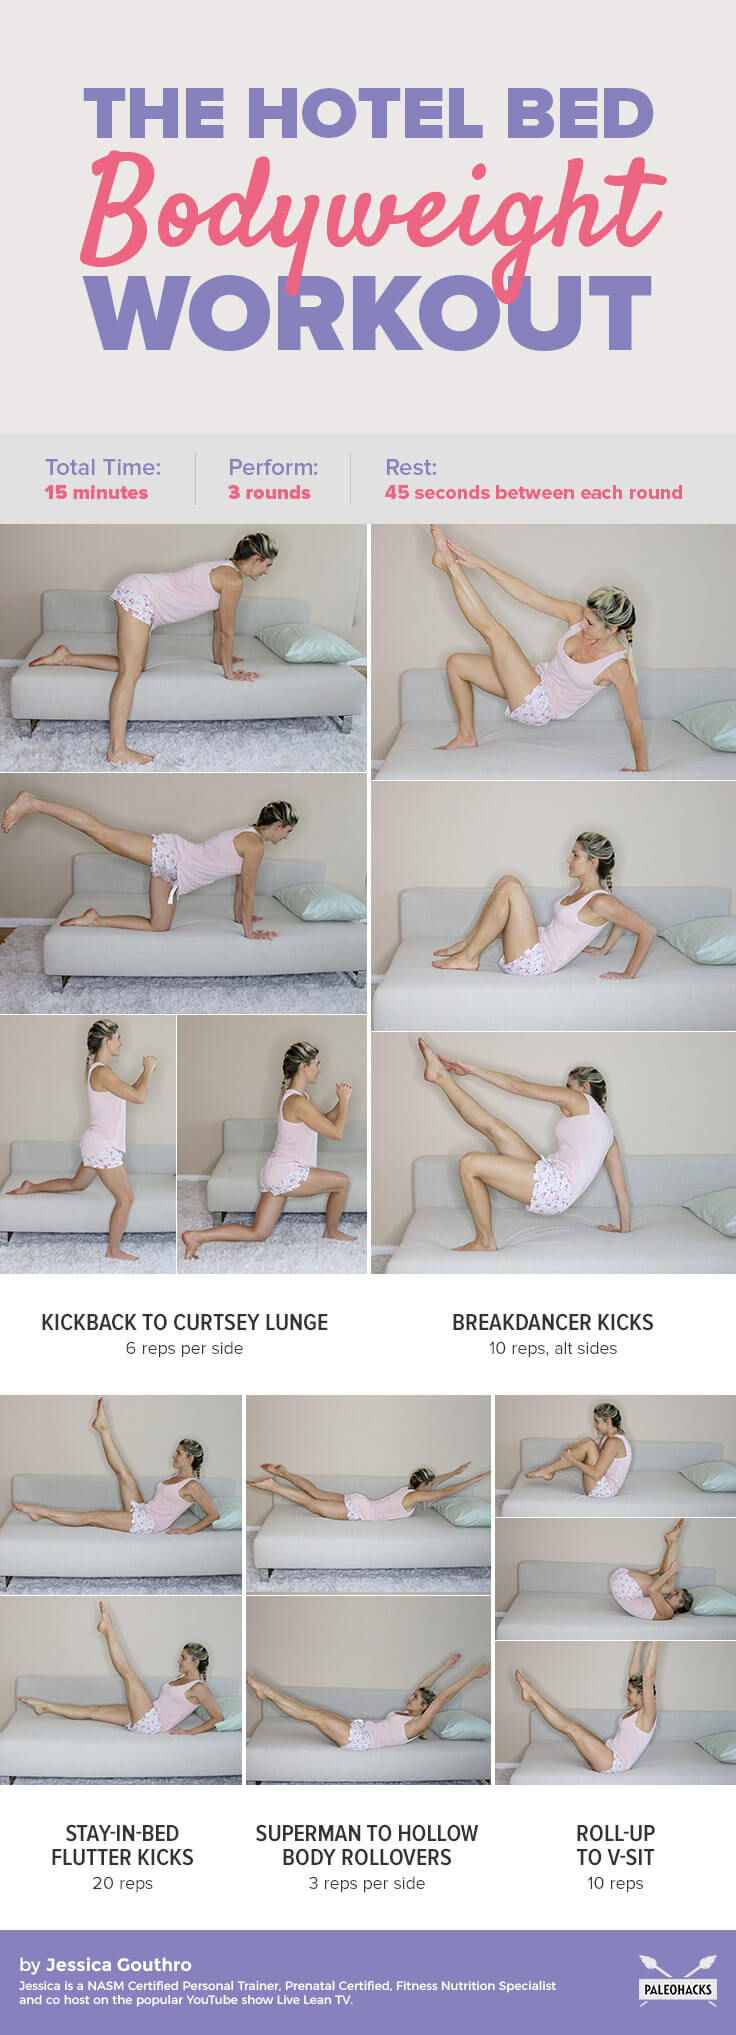 hotel bed bodyweight workout pin